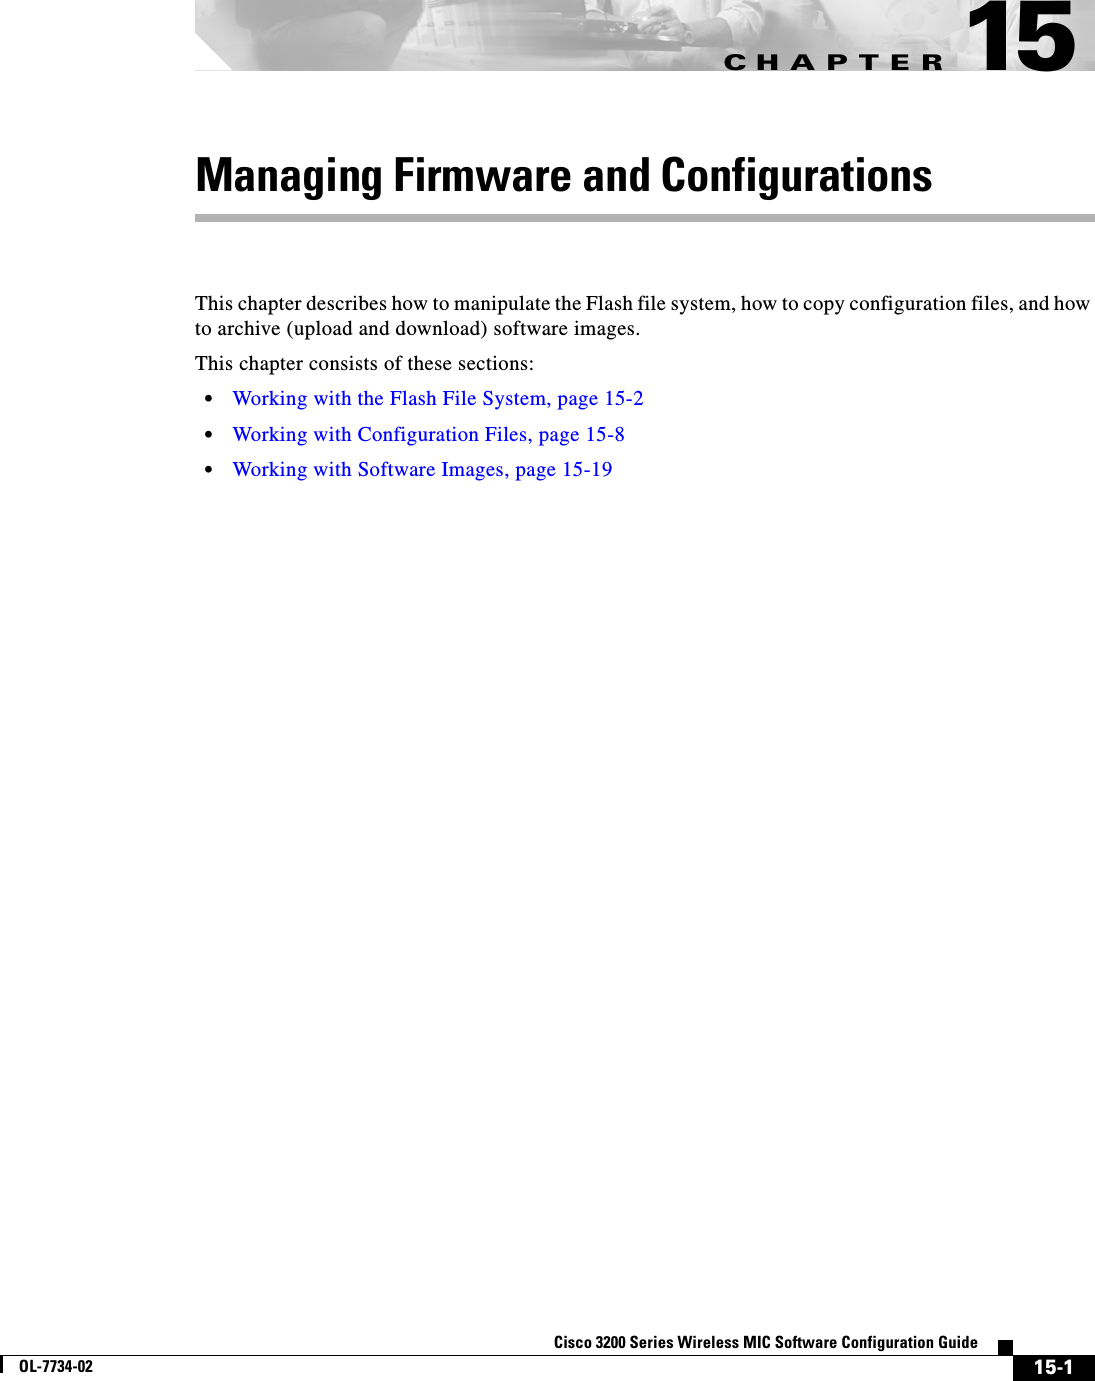 CHAPTER15-1Cisco 3200 Series Wireless MIC Software Configuration GuideOL-7734-0215Managing Firmware and ConfigurationsThis chapter describes how to manipulate the Flash file system, how to copy configuration files, and how to archive (upload and download) software images. This chapter consists of these sections:•Working with the Flash File System, page 15-2•Working with Configuration Files, page 15-8•Working with Software Images, page 15-19